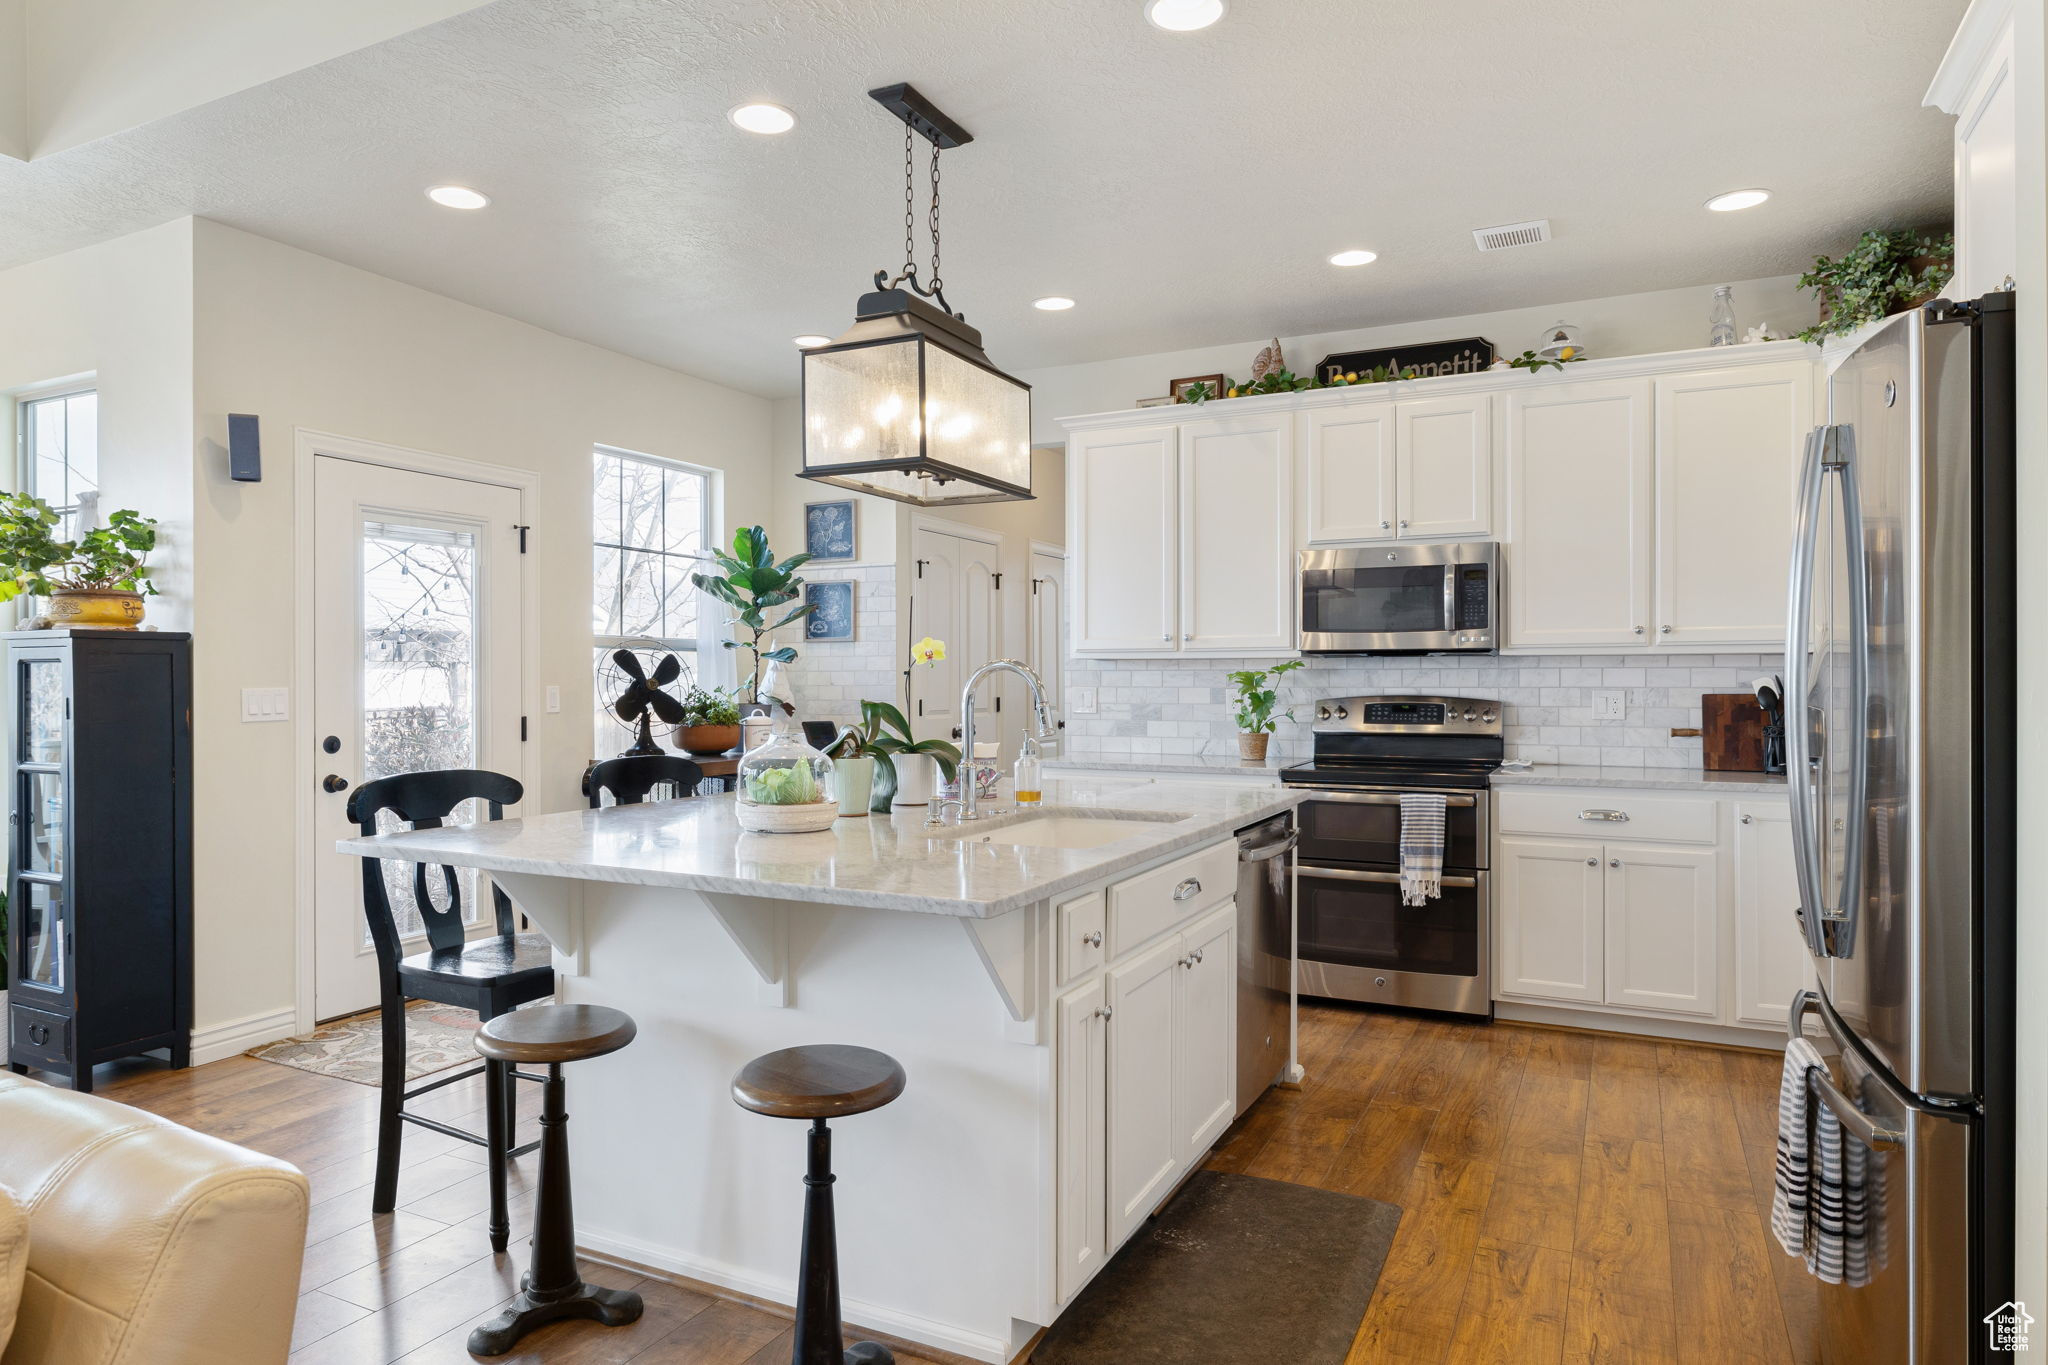 Kitchen featuring pendant lighting, hardwood / wood-style floors, appliances with stainless steel finishes, a kitchen island with sink, and sink